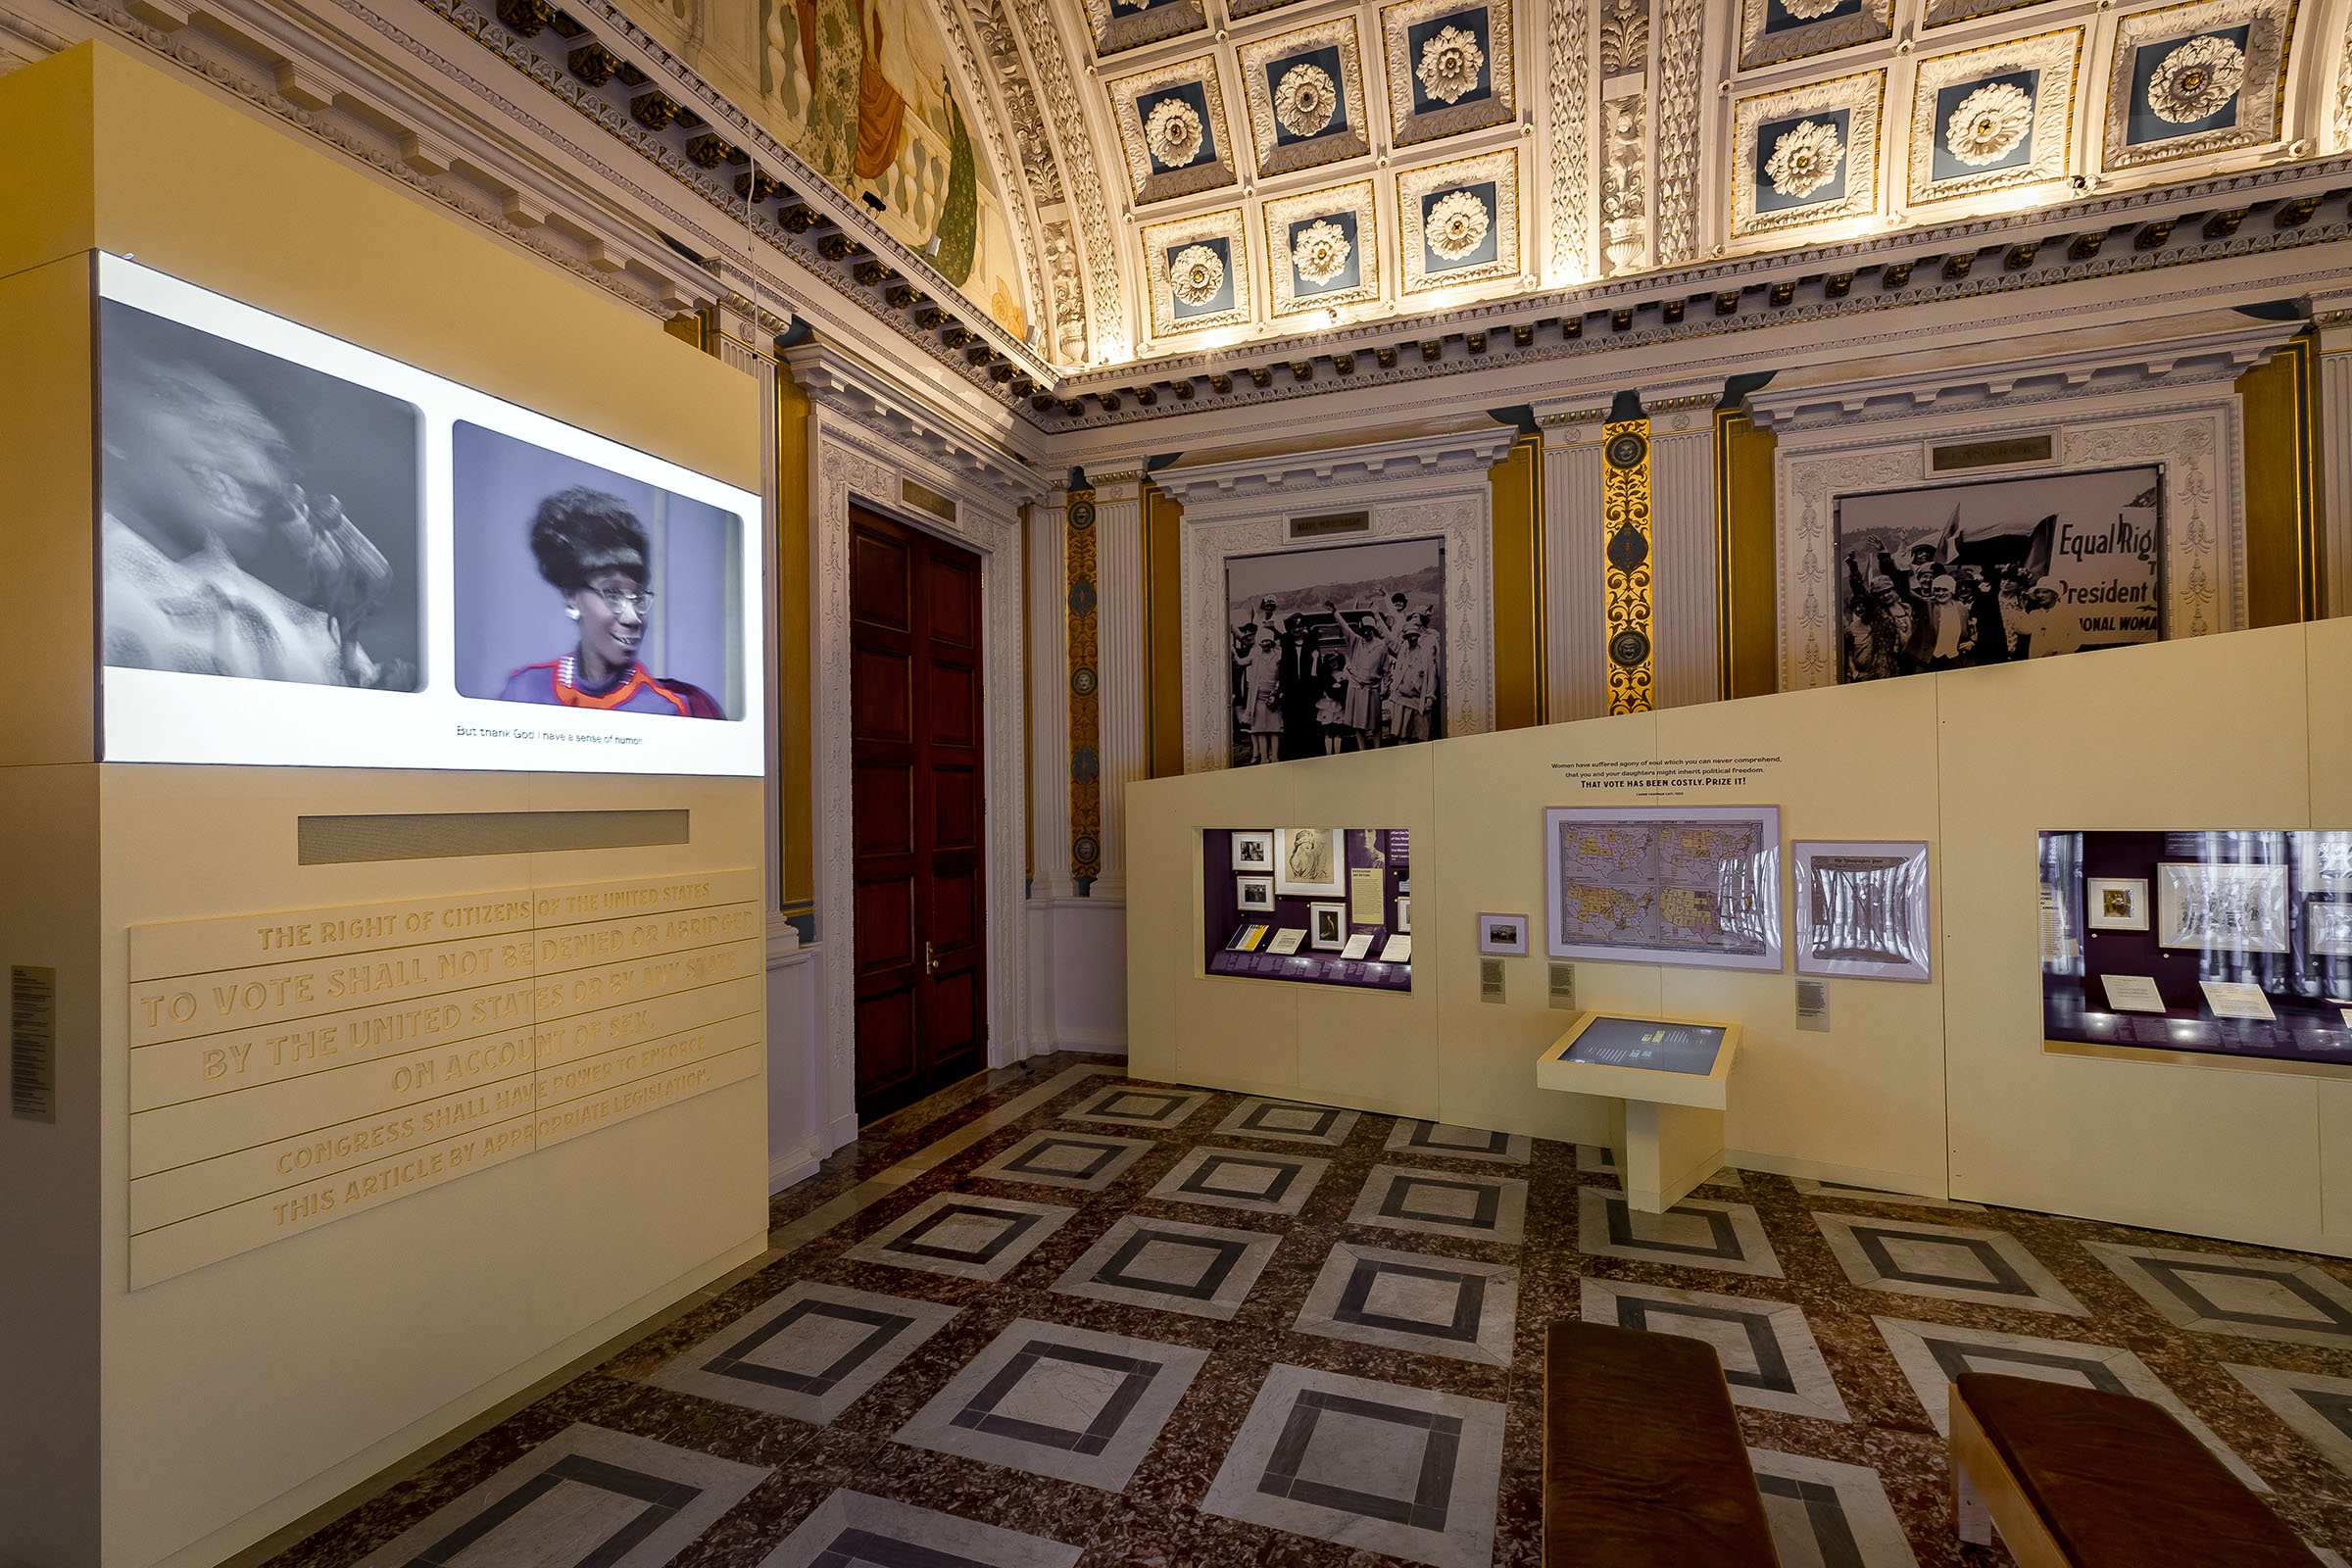 Shall Not Be Denied Exhibition. In the “plaza,” the suffragists’ activism finally results in the passage of the Nineteenth Amendment, and visitors explore the social and political aftermath.